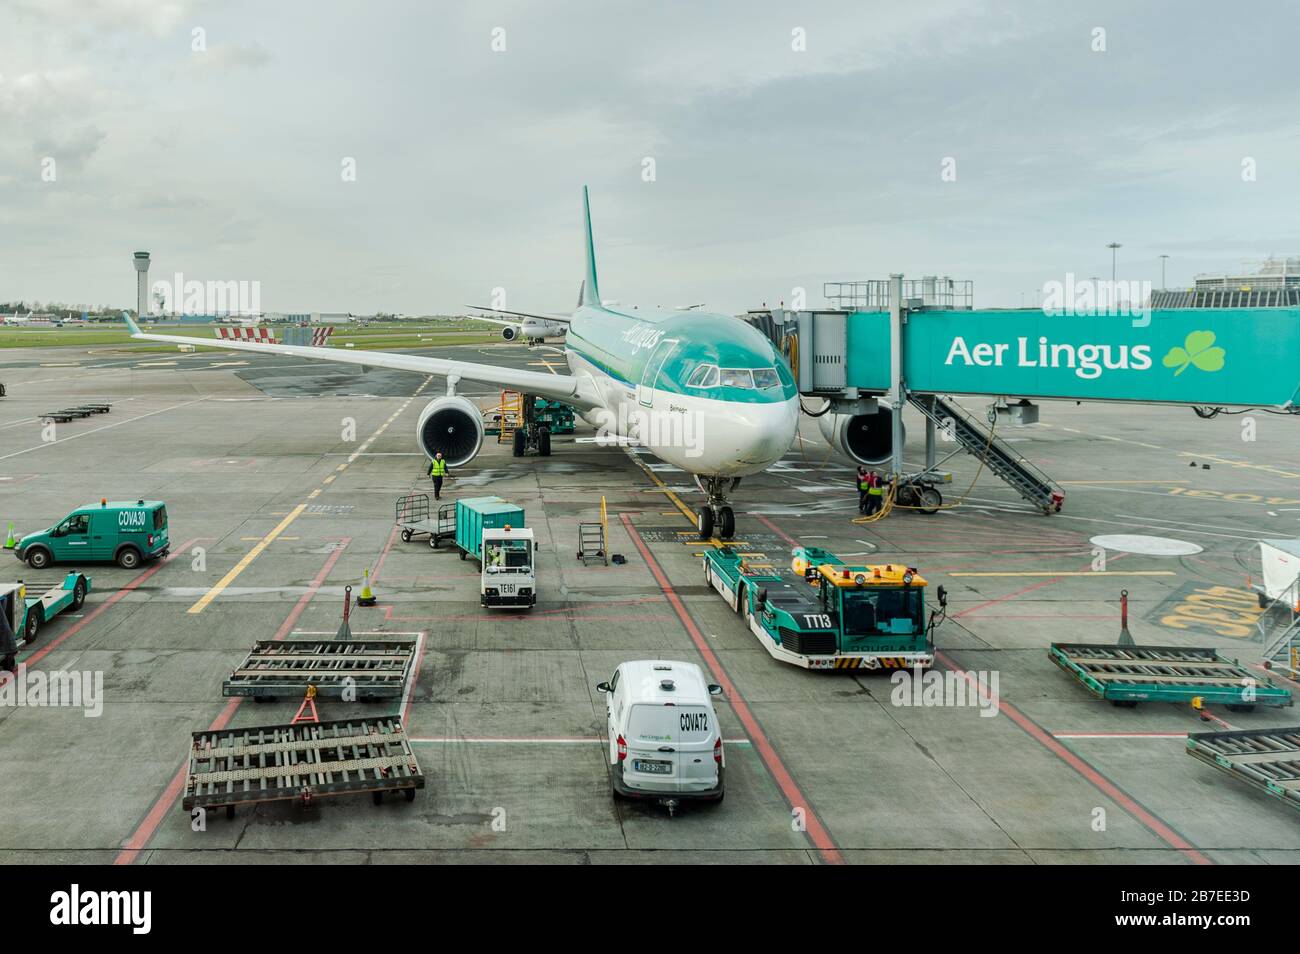 Aer Lingus Airbus A330-200 parked at the gate preparing for a flight at Dublin Airport, Ireland. Stock Photo